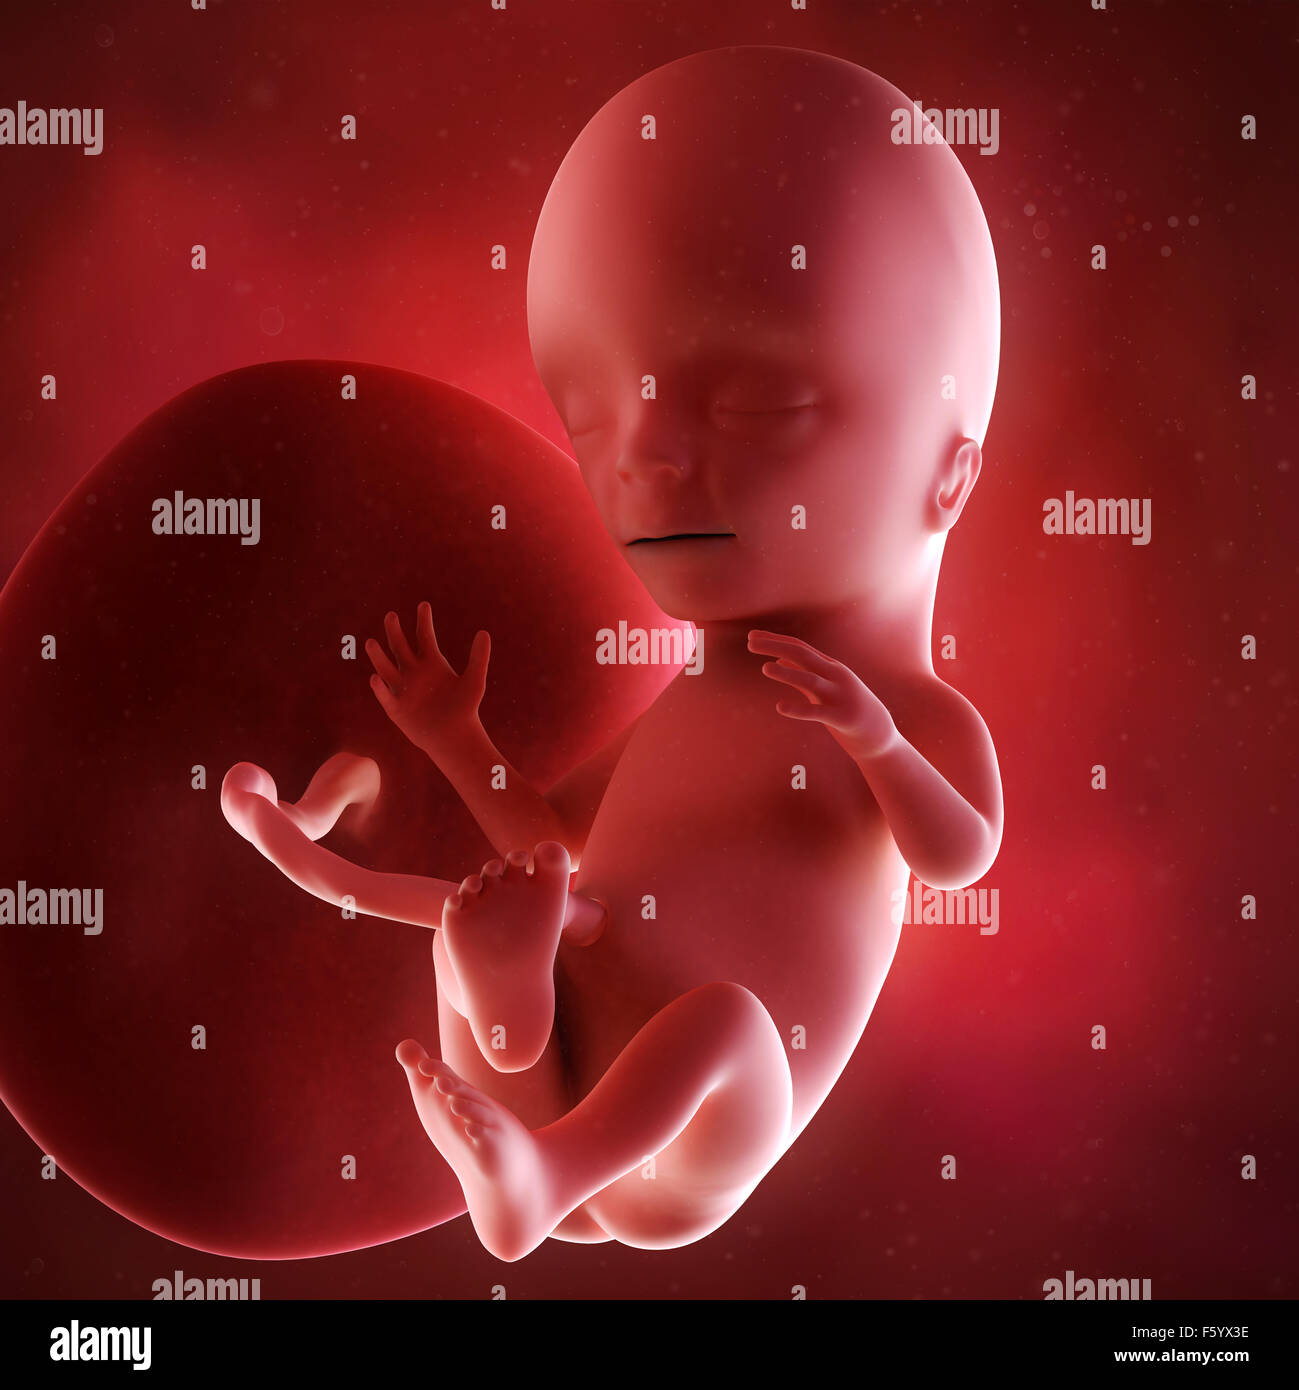 medical accurate 3d illustration of a fetus week 15 Stock Photo